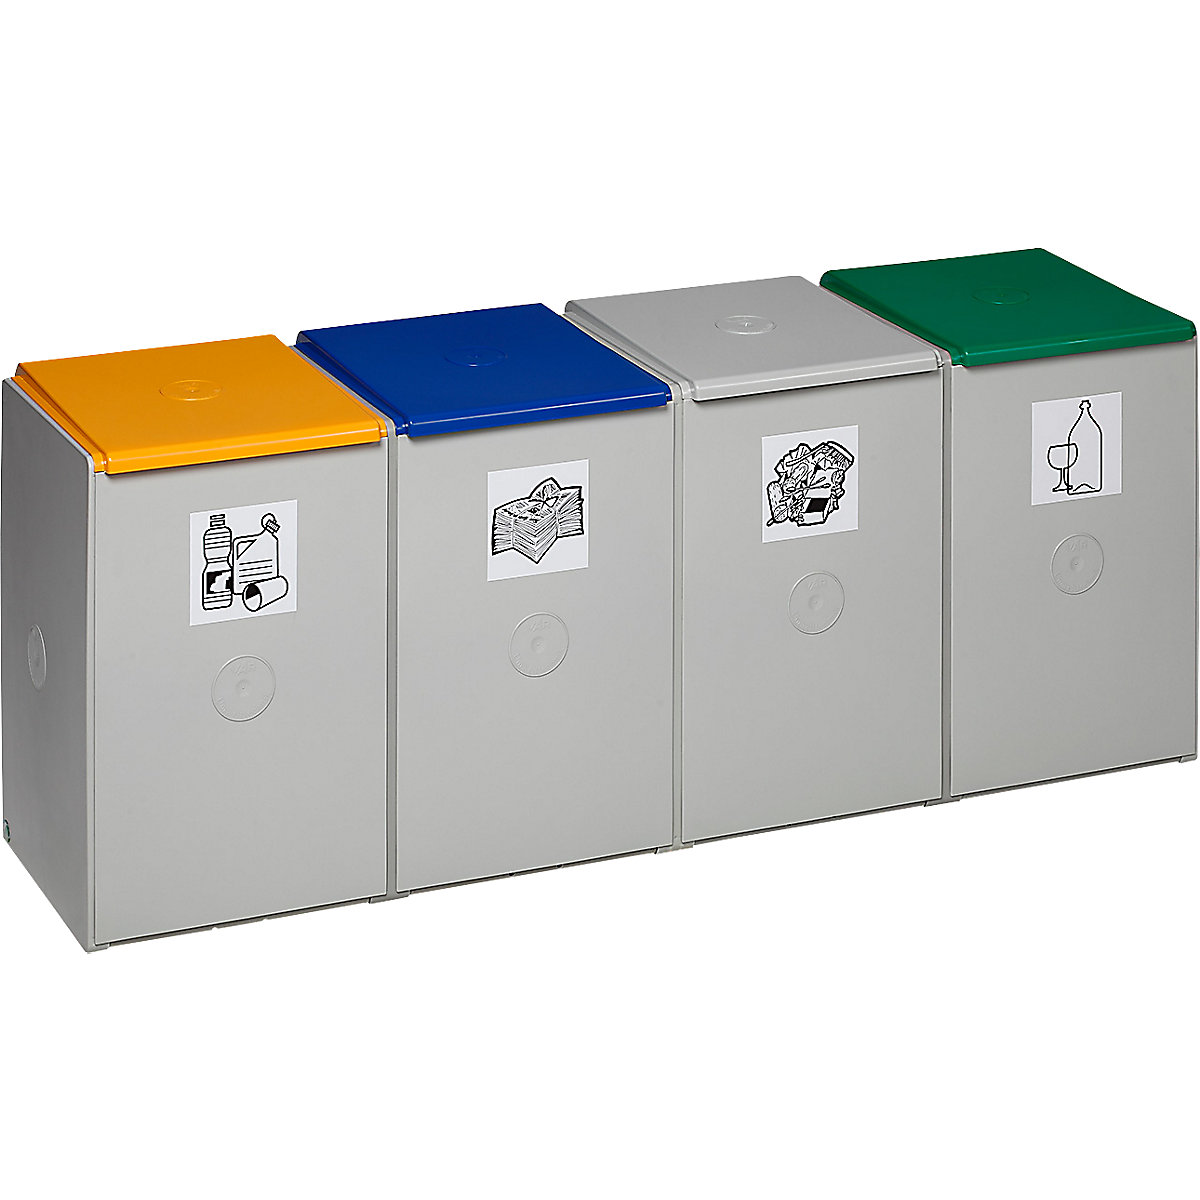 Separate collection containers for recyclables – VAR, for capacity 60 l, 4 compartment collector-5